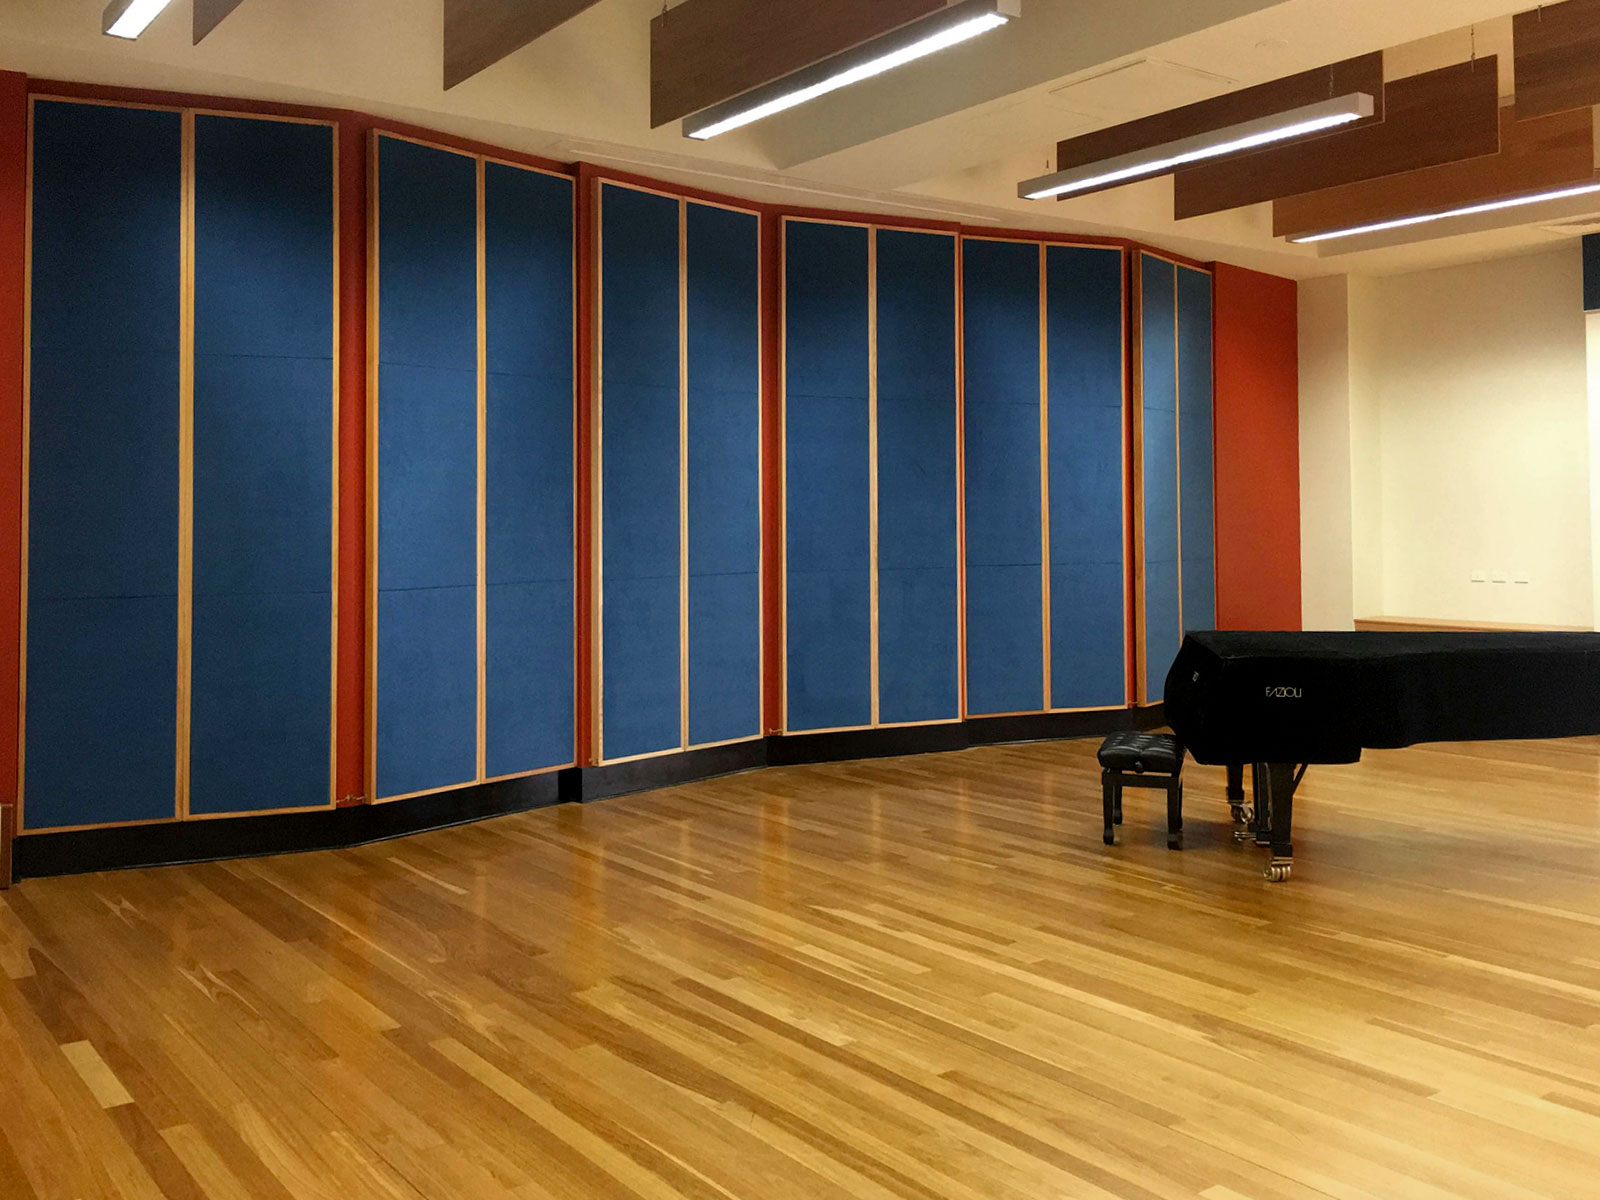 Soundproofed music room with piano